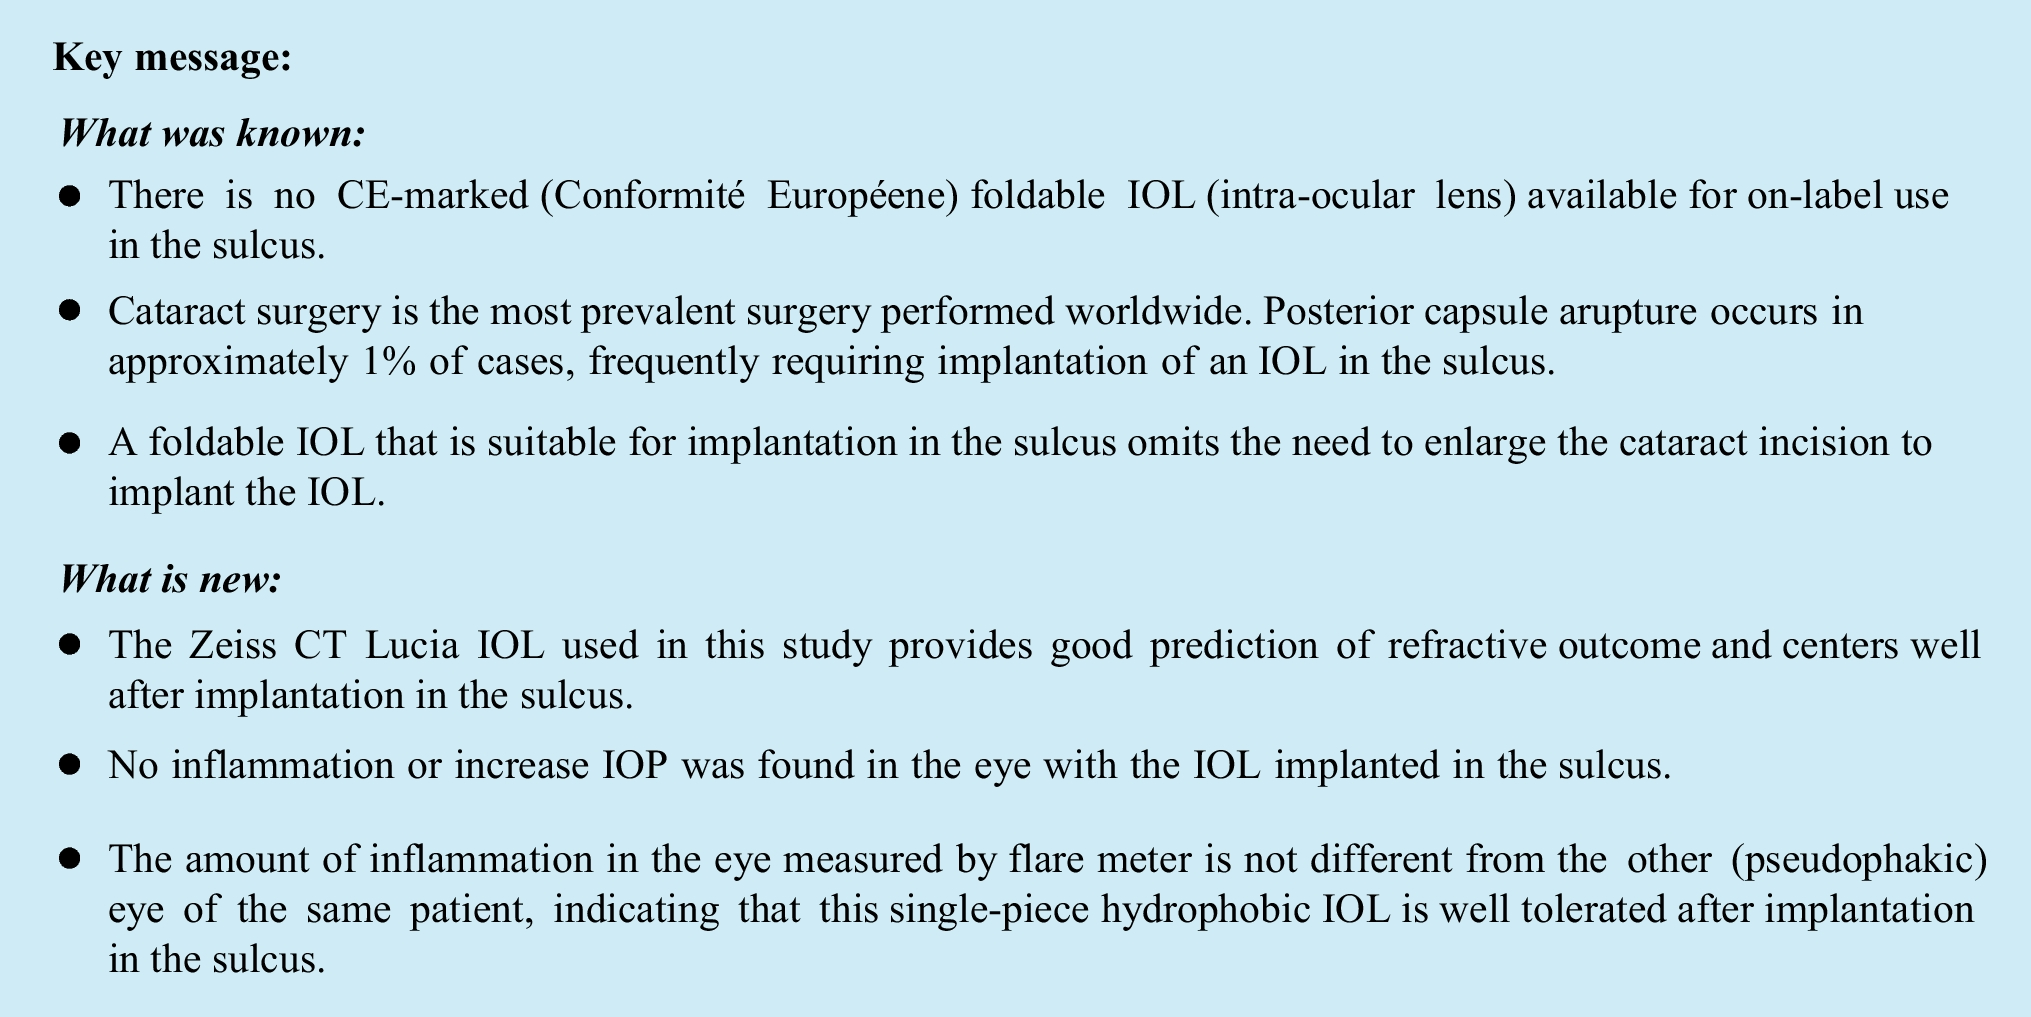 Efficacy and safety of the implantation of a single-piece angulated foldable IOL in the sulcus